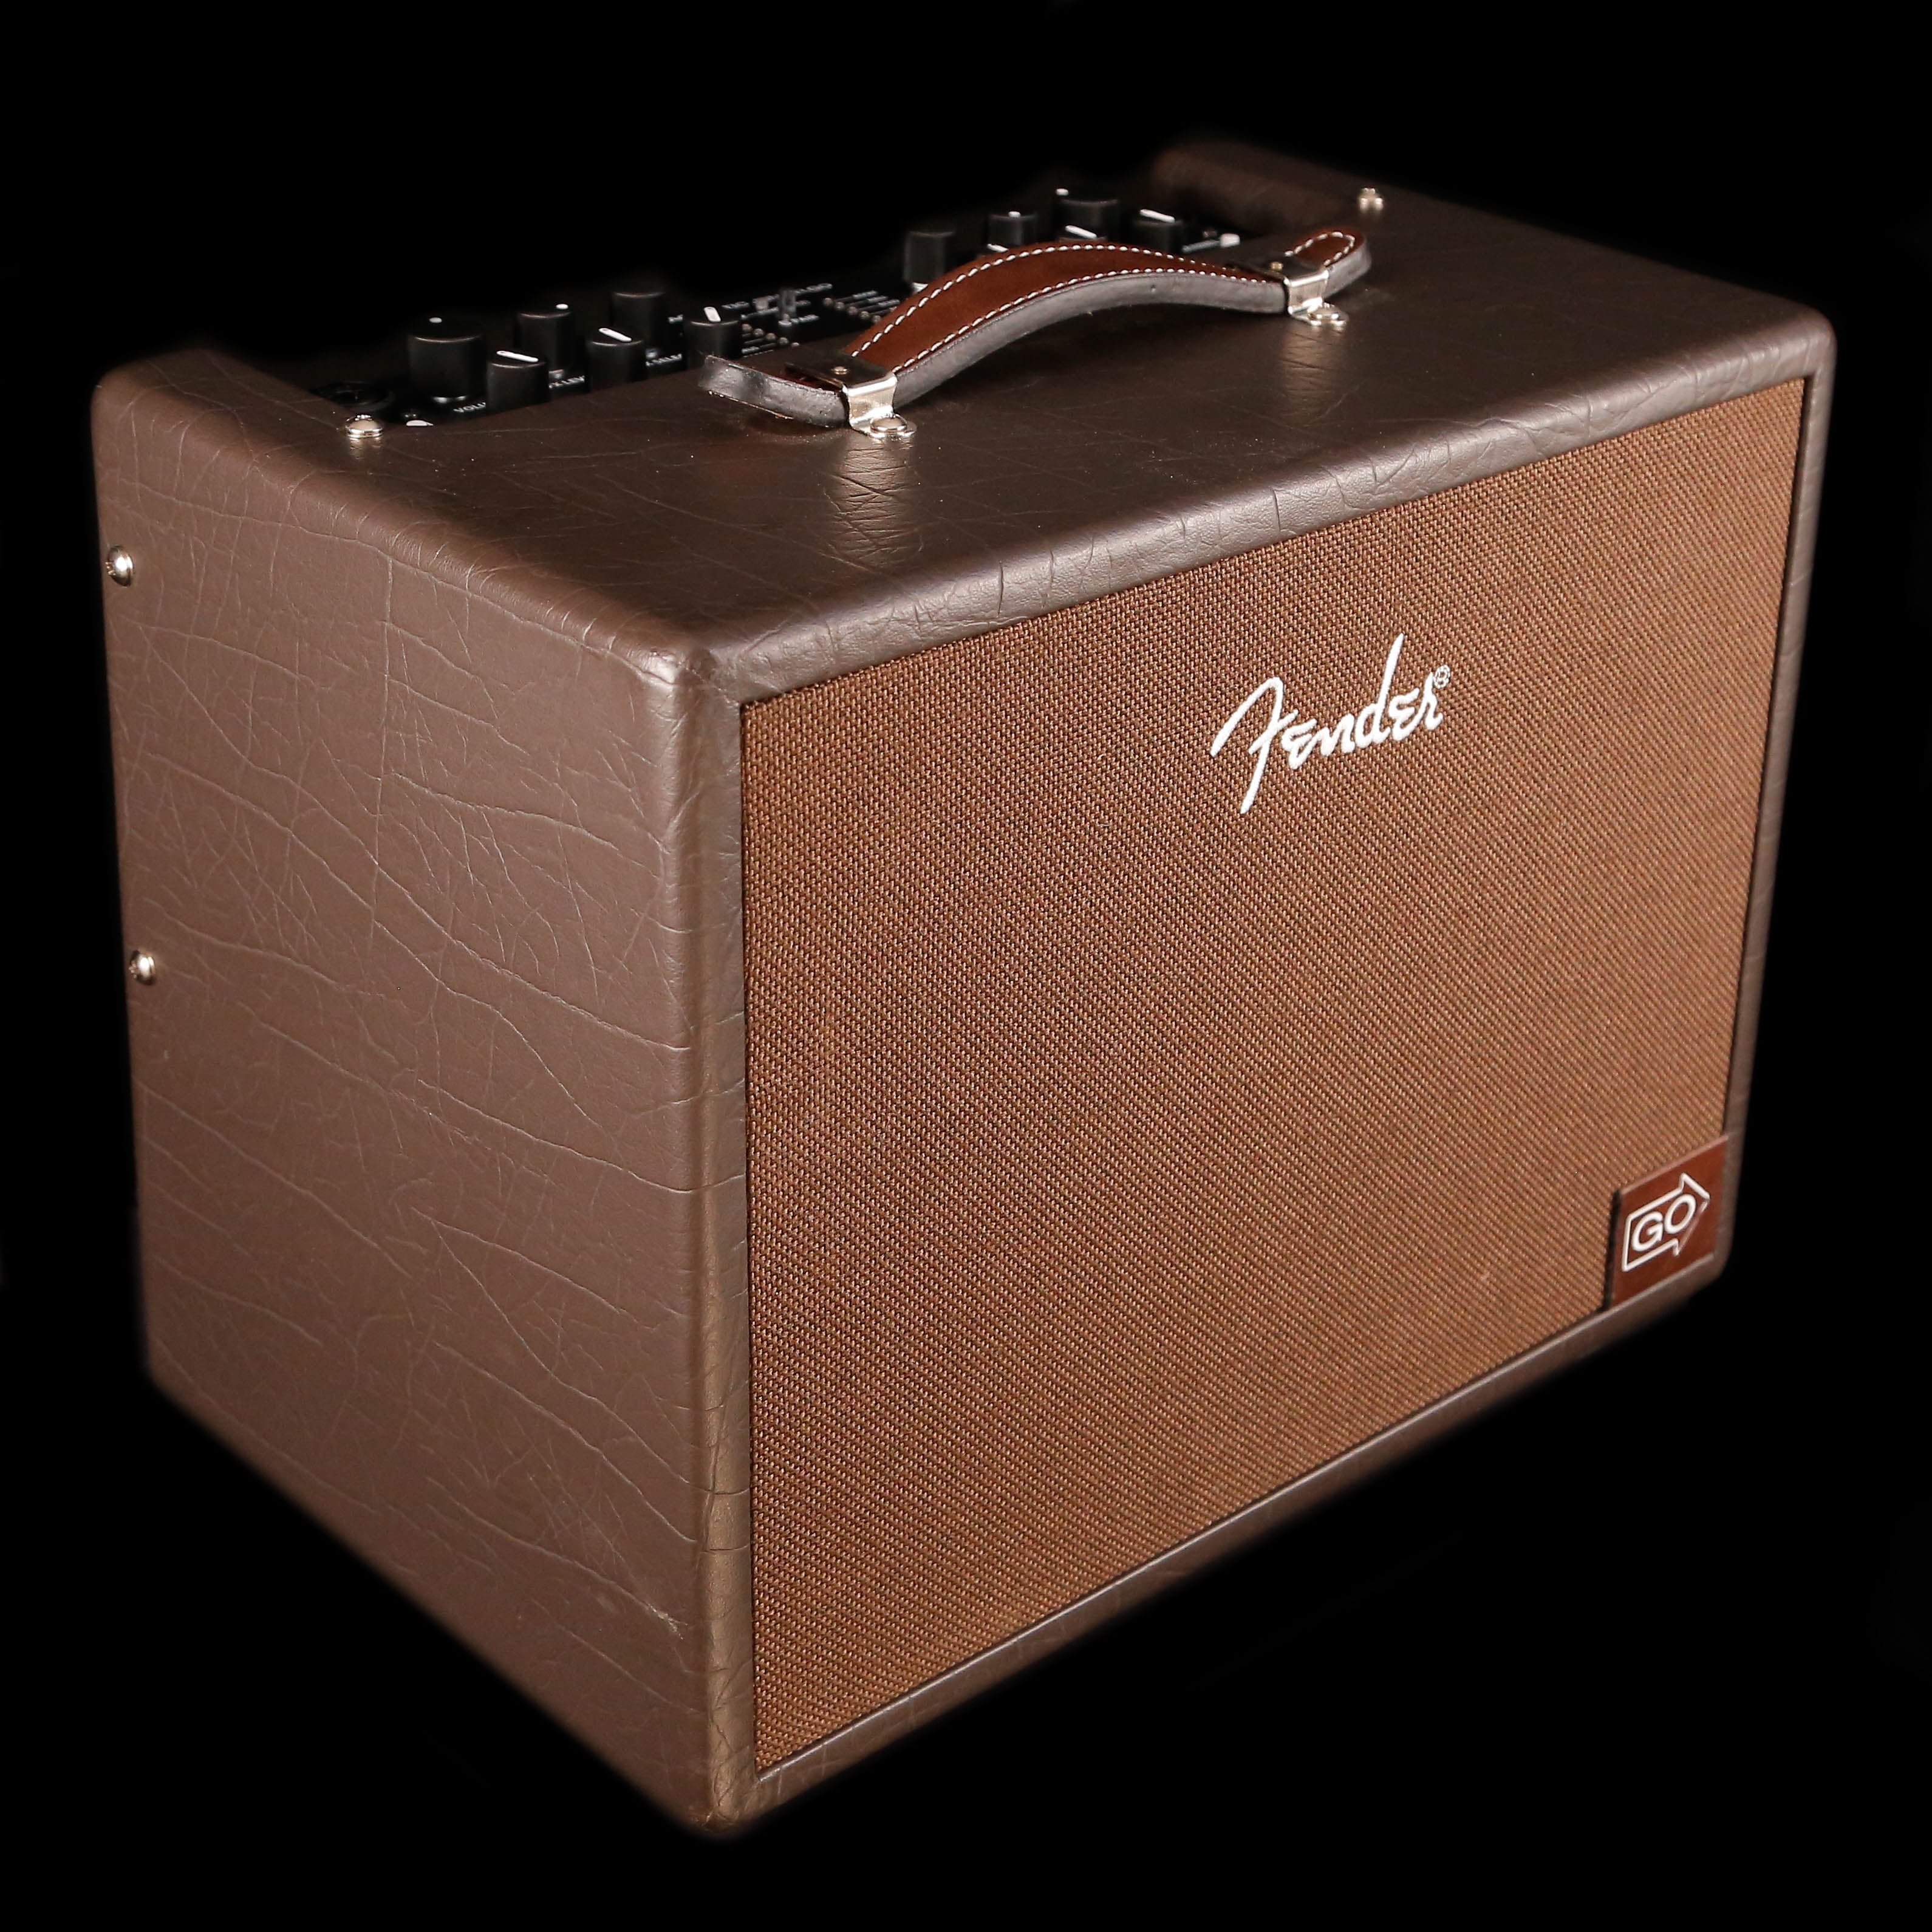 Fender Acoustic Junior Go - 100-watt Acoustic Amp with Rechargeable Battery